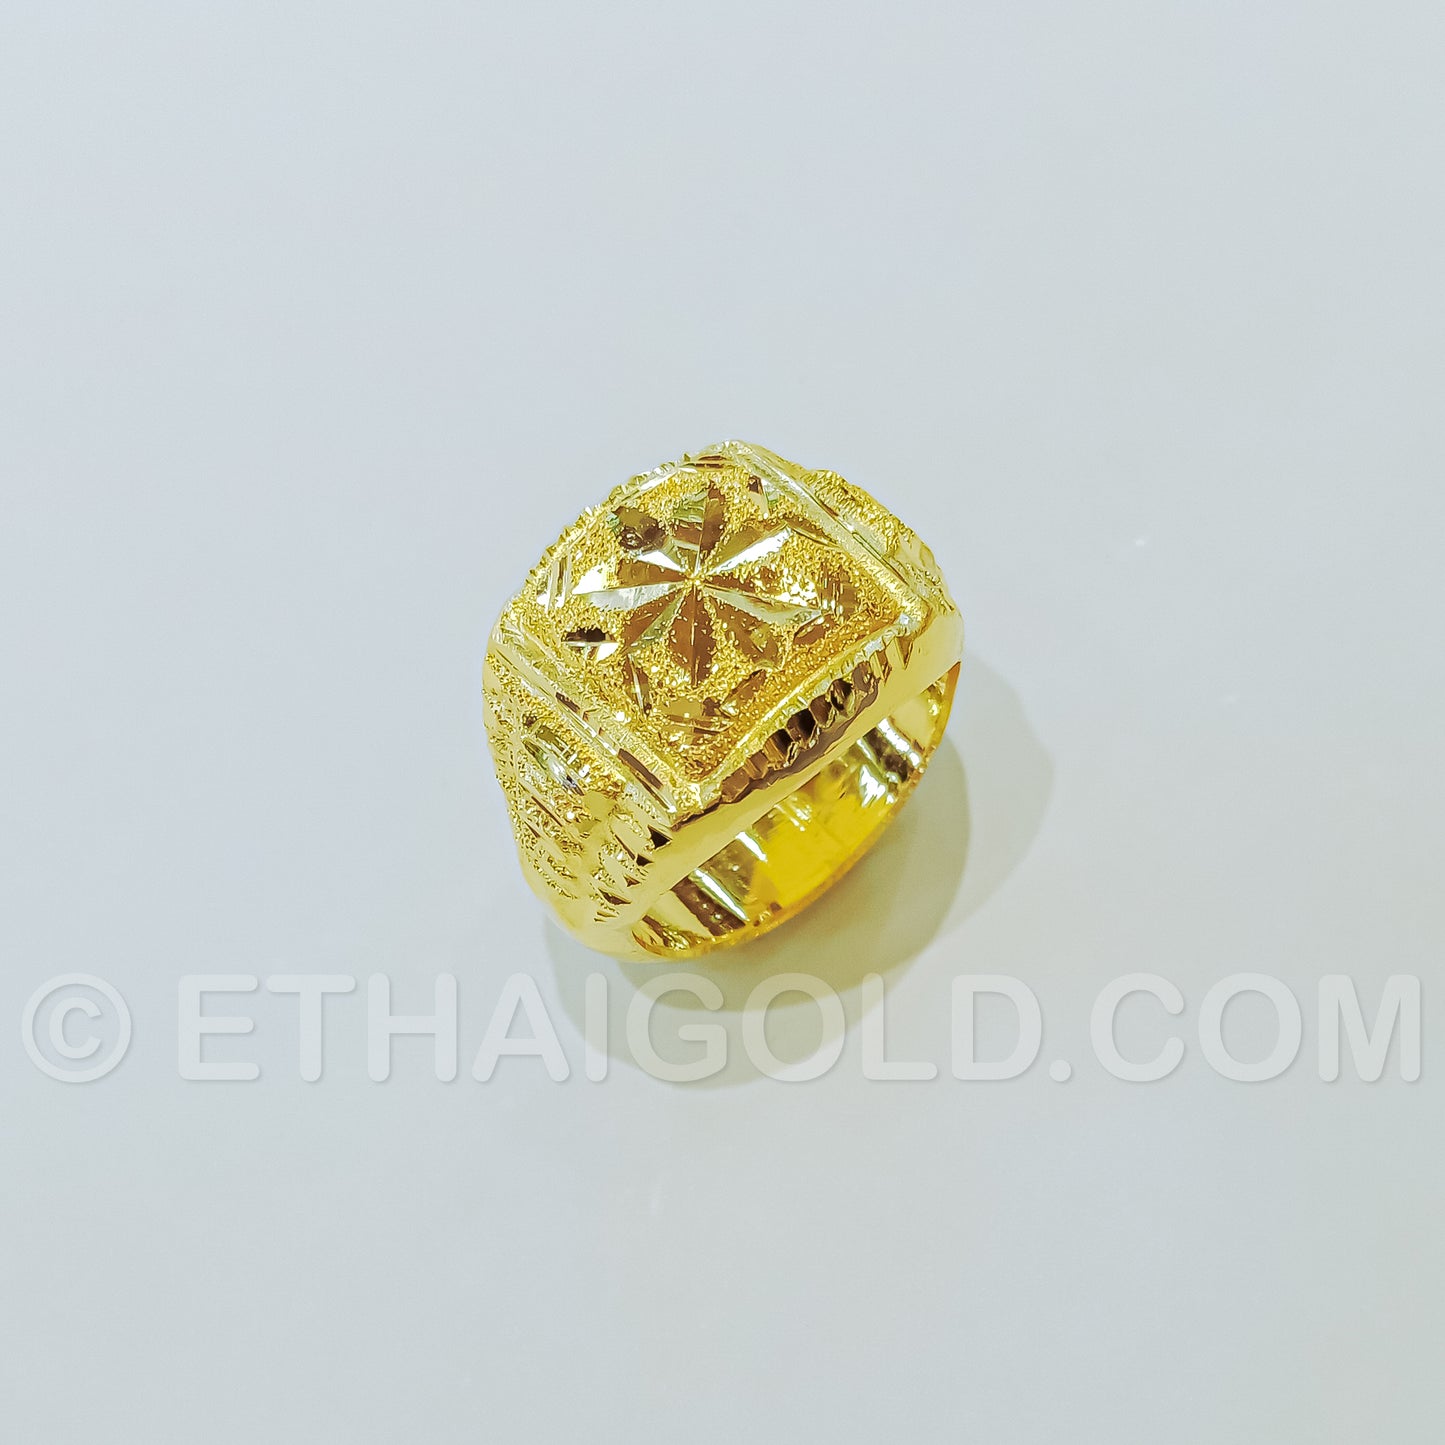 2 BAHT POLISHED SPARKLING DIAMOND-CUT HOLLOW SQUARE CLASSIC RING IN 23K GOLD (ID: R1002B)